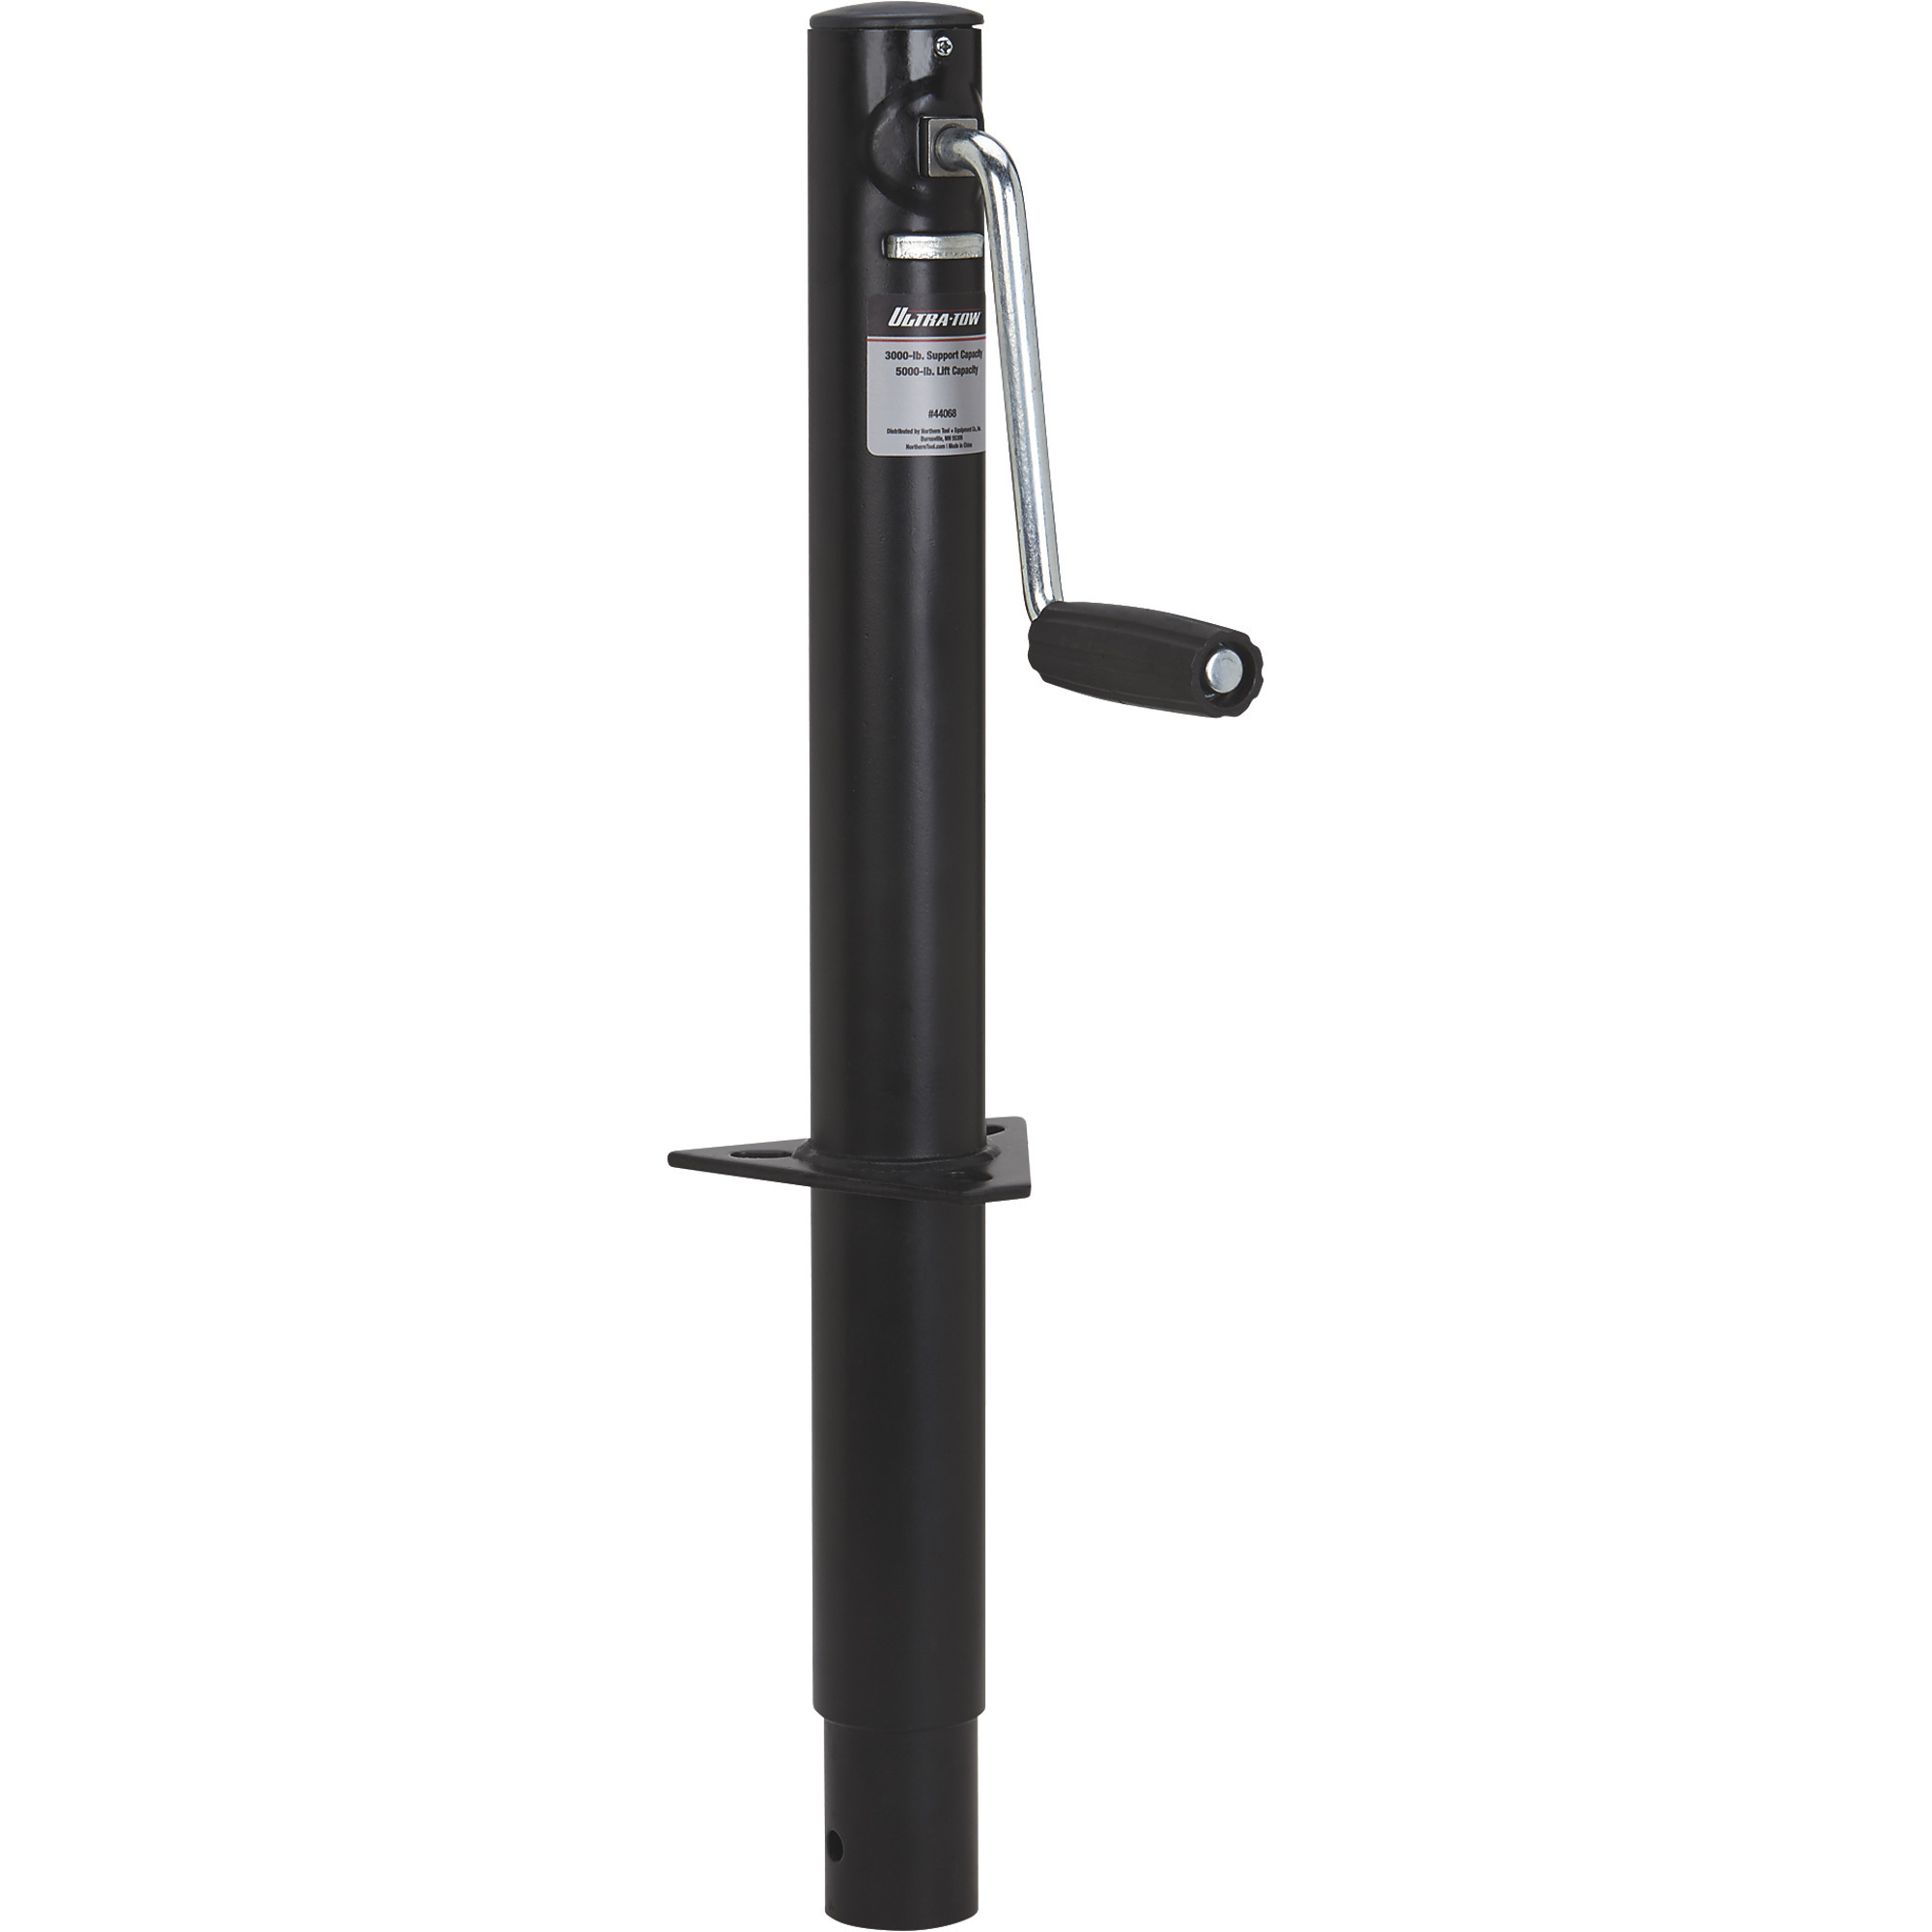 Ultra-Tow Sidewind A-Frame Jack, 3000-lb. Lift Capacity